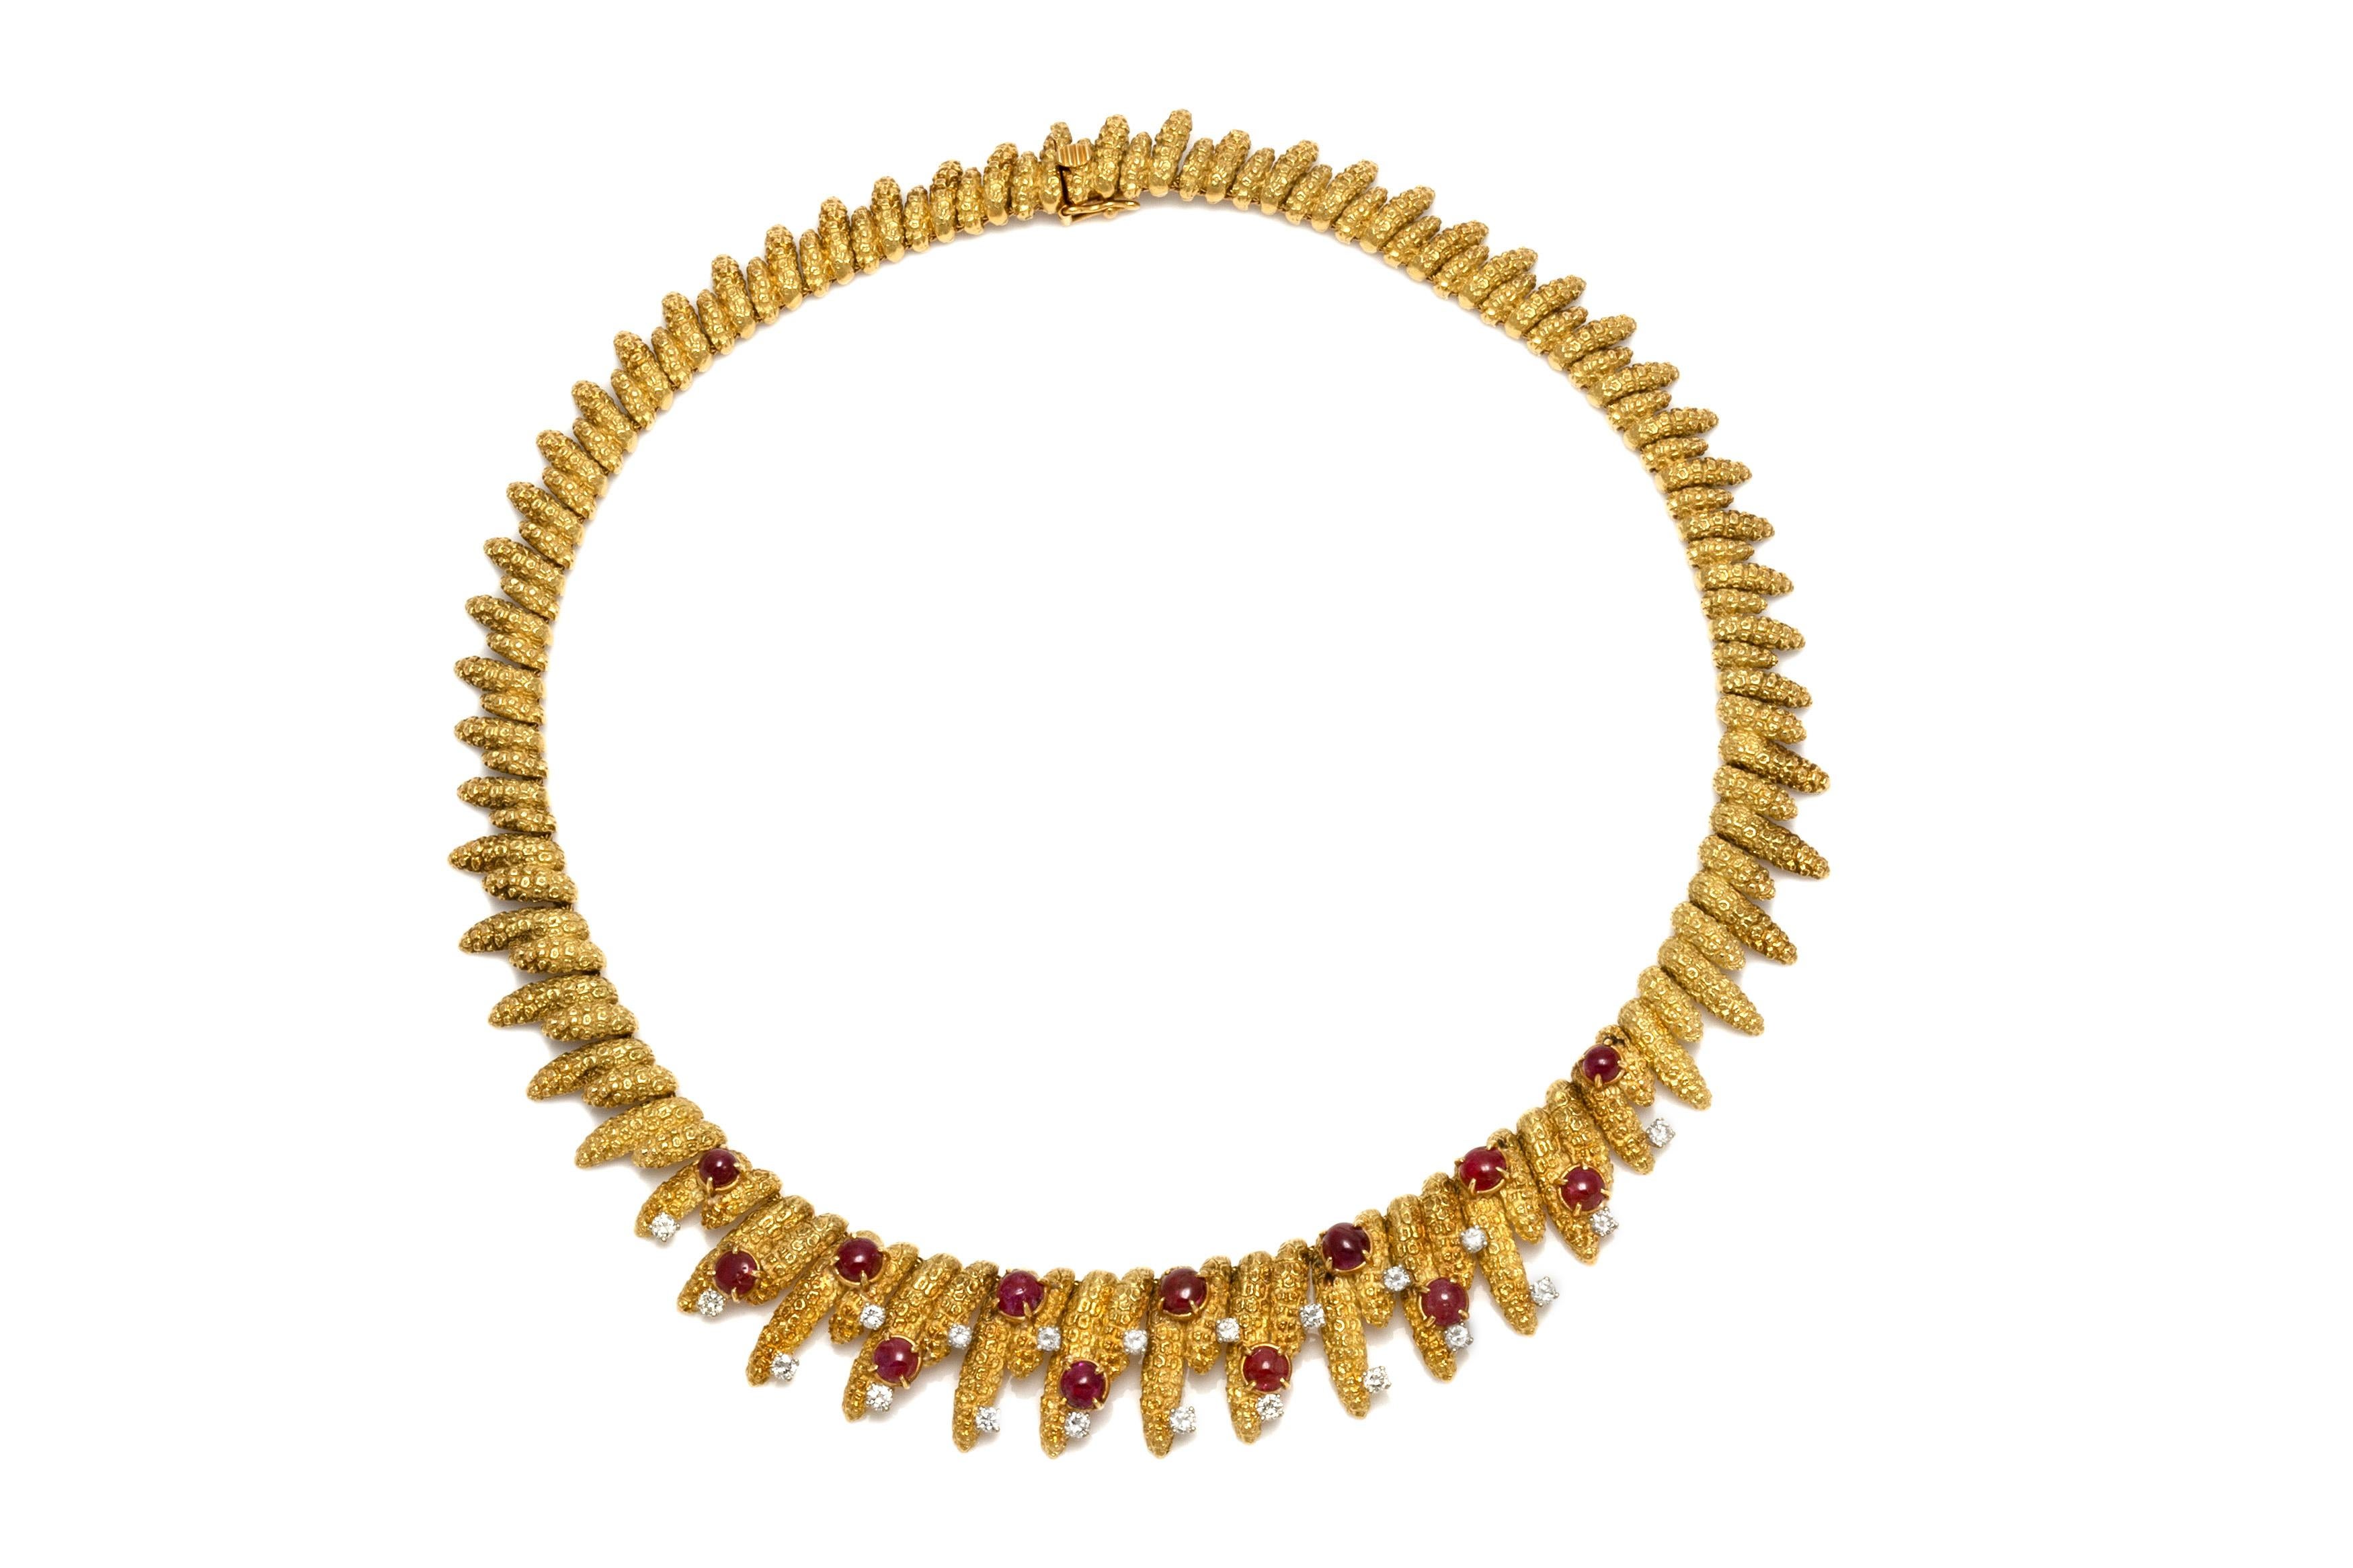 Finley crafted in 18k yellow gold with cabochon Rubies weighing approximately a total of 4.00 carats, and Round Brilliant cut Diamonds weighing approximately 1.50 carats.
French, made in Paris
Circa 1960s